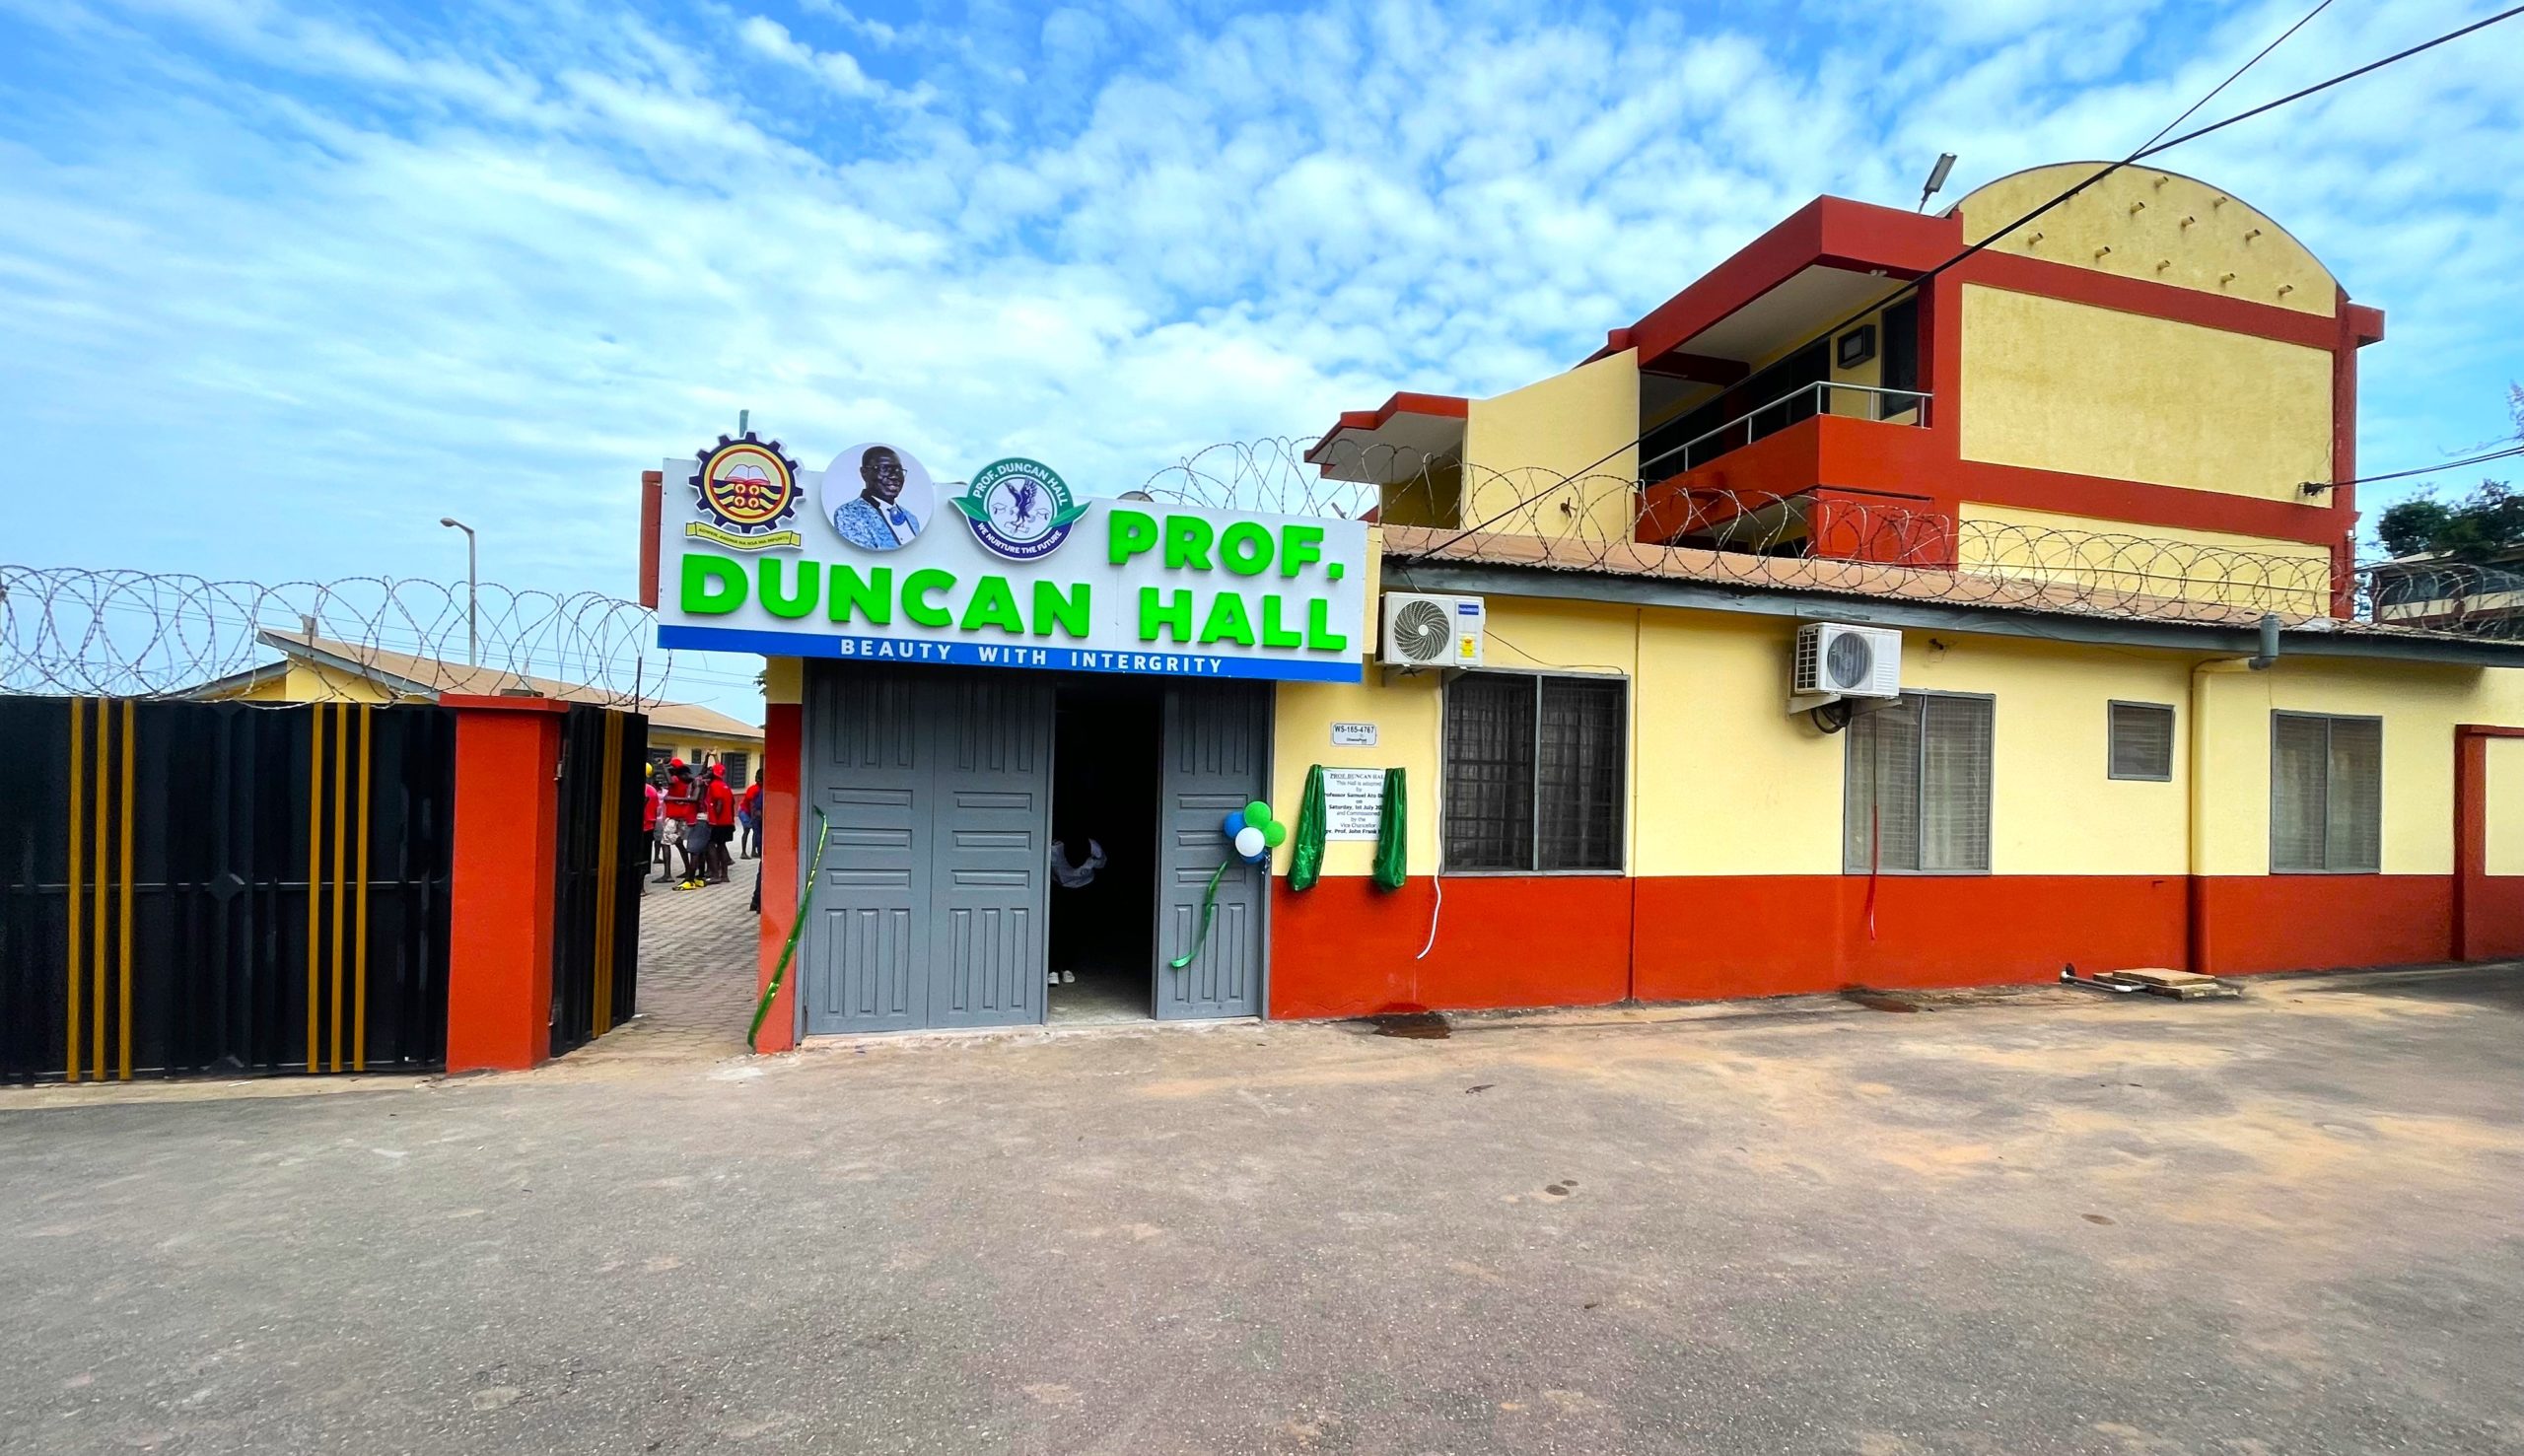 GHACEM HALL RENAMED AS PROF picture image